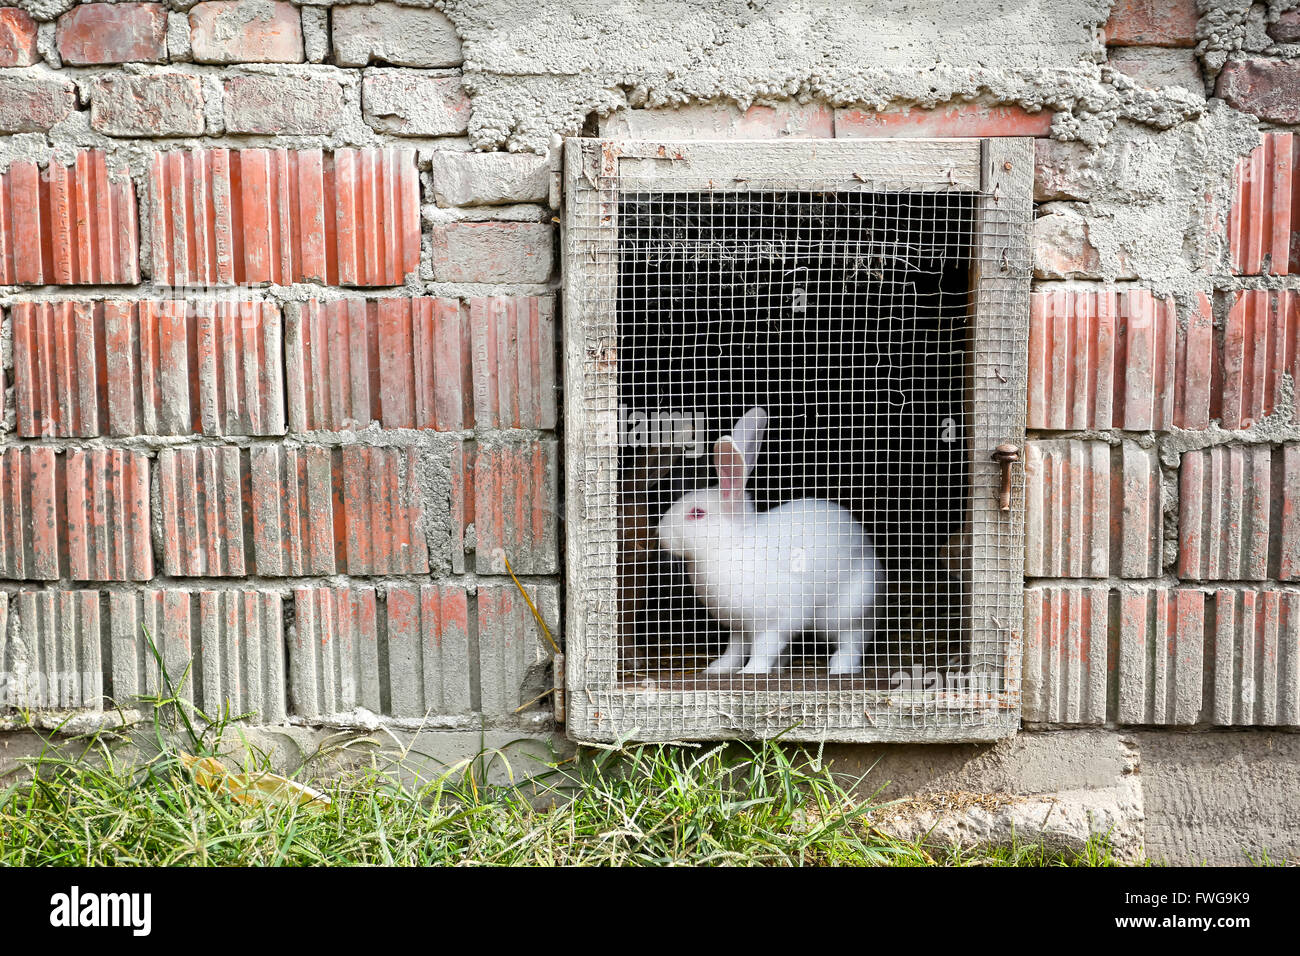 A white rabbit in a farm cage in the countryside. Stock Photo